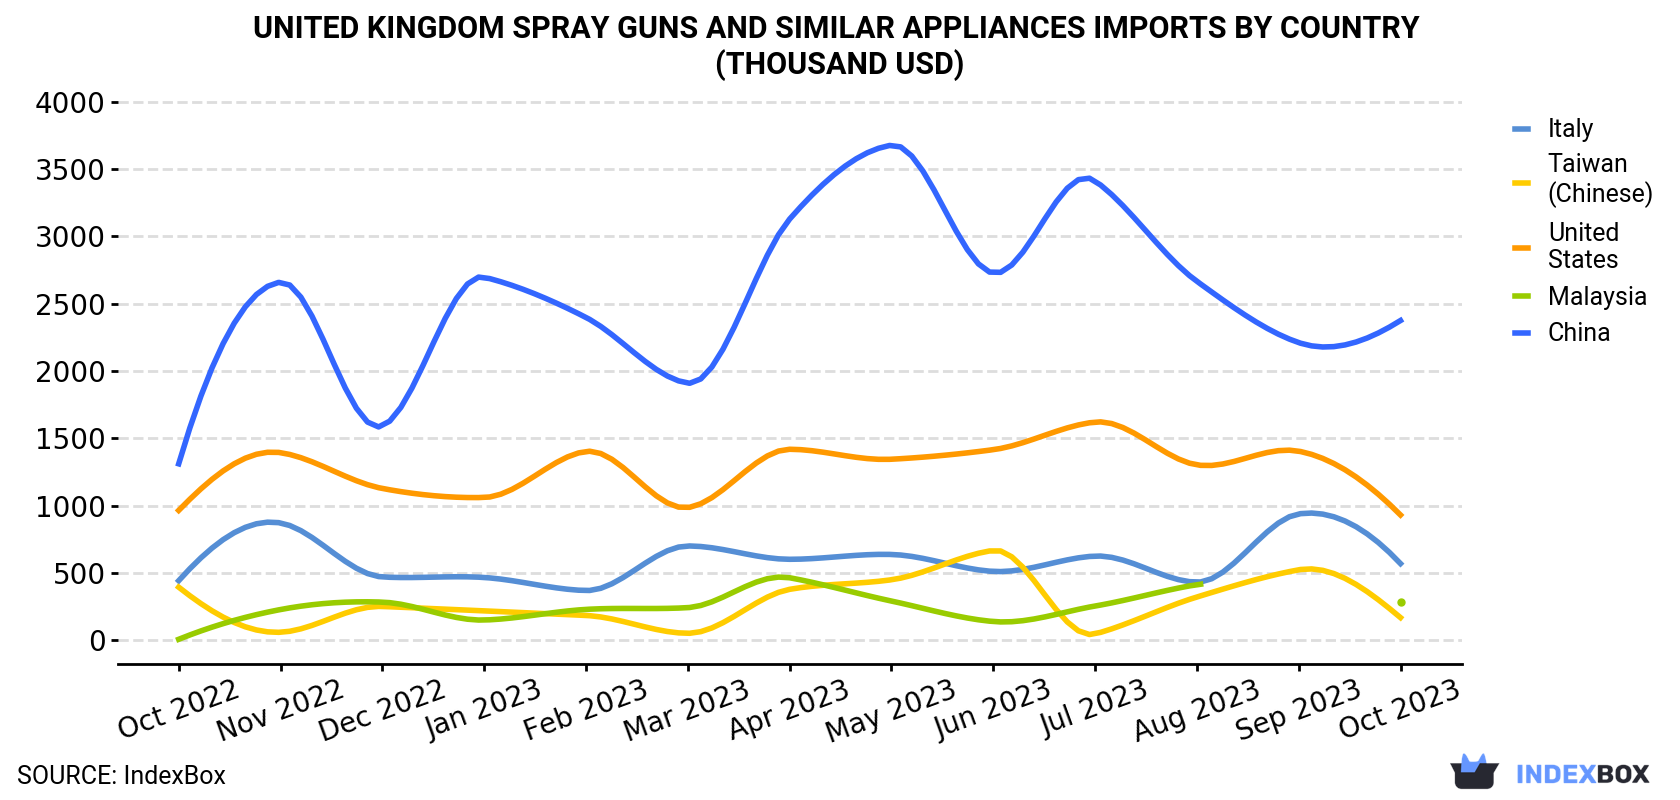 United Kingdom Spray Guns And Similar Appliances Imports By Country (Thousand USD)